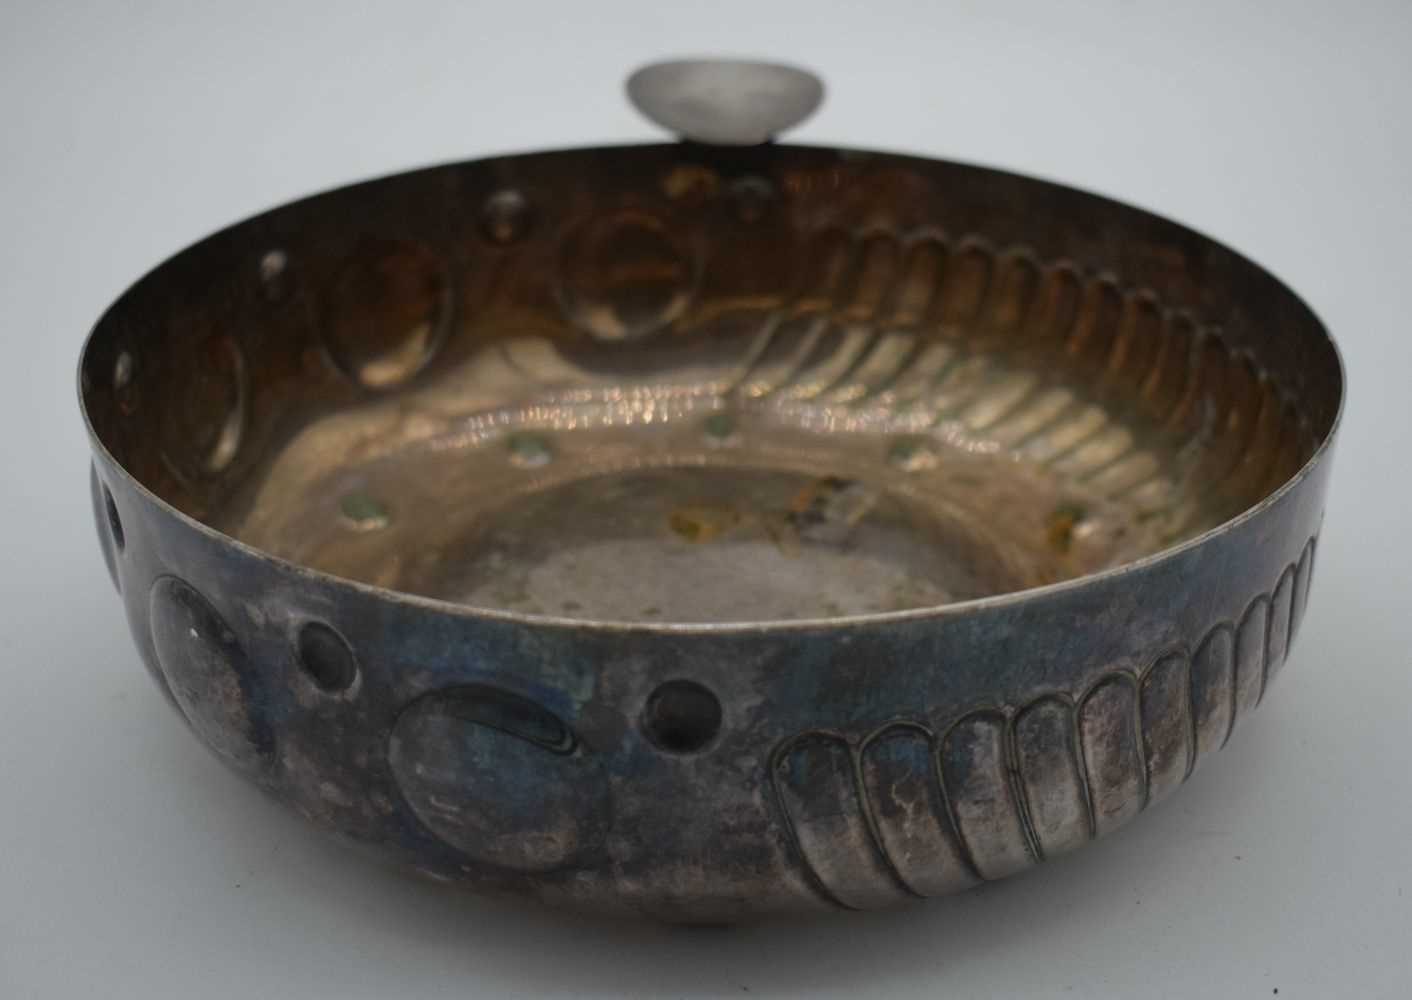 A VERY RARE ANTIQUE ARTS AND CRAFTS MONUMENTAL SILVER PLATED WINE TASTER. 842 grams. 30cm x 24 cm. - Image 2 of 4